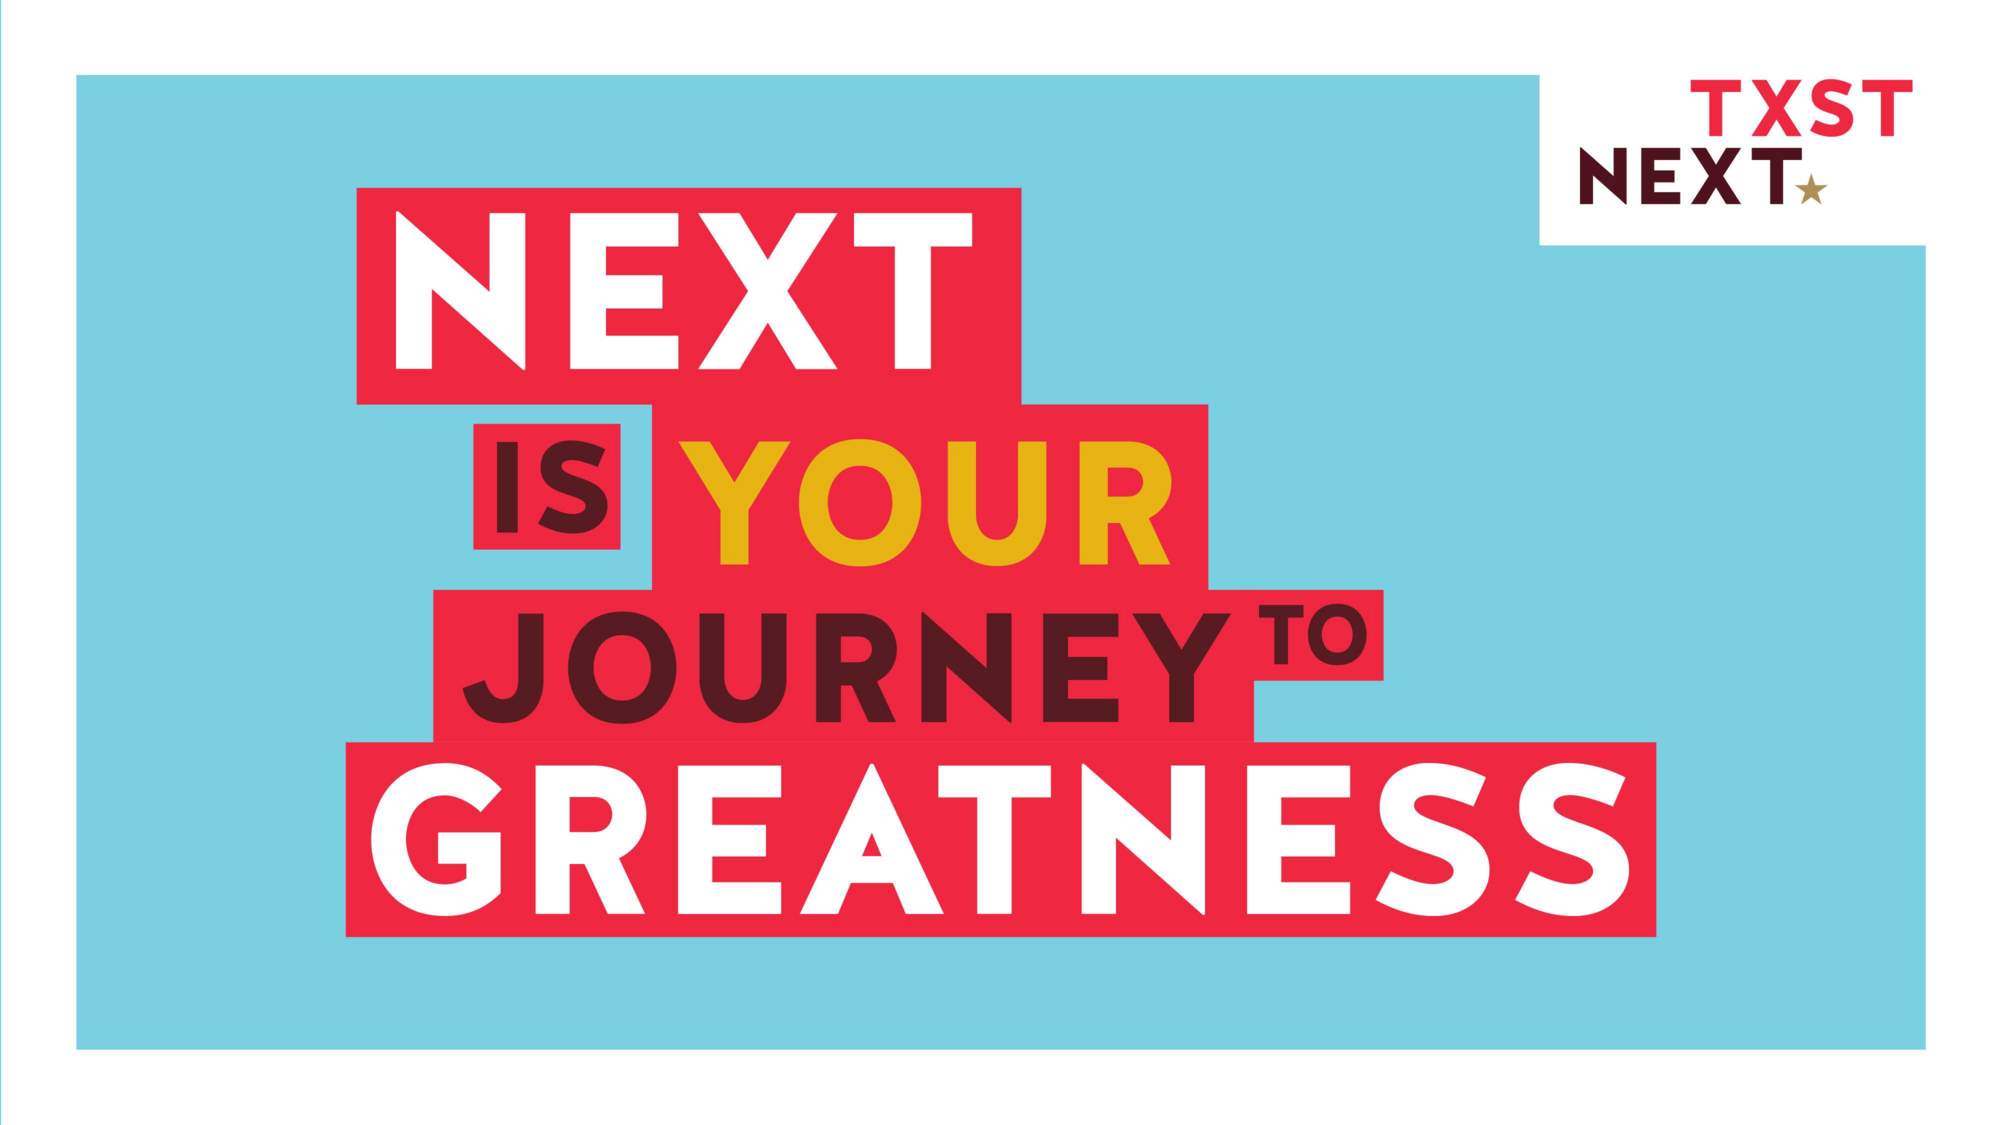 A digital sign says "Next is your journey to greatness."